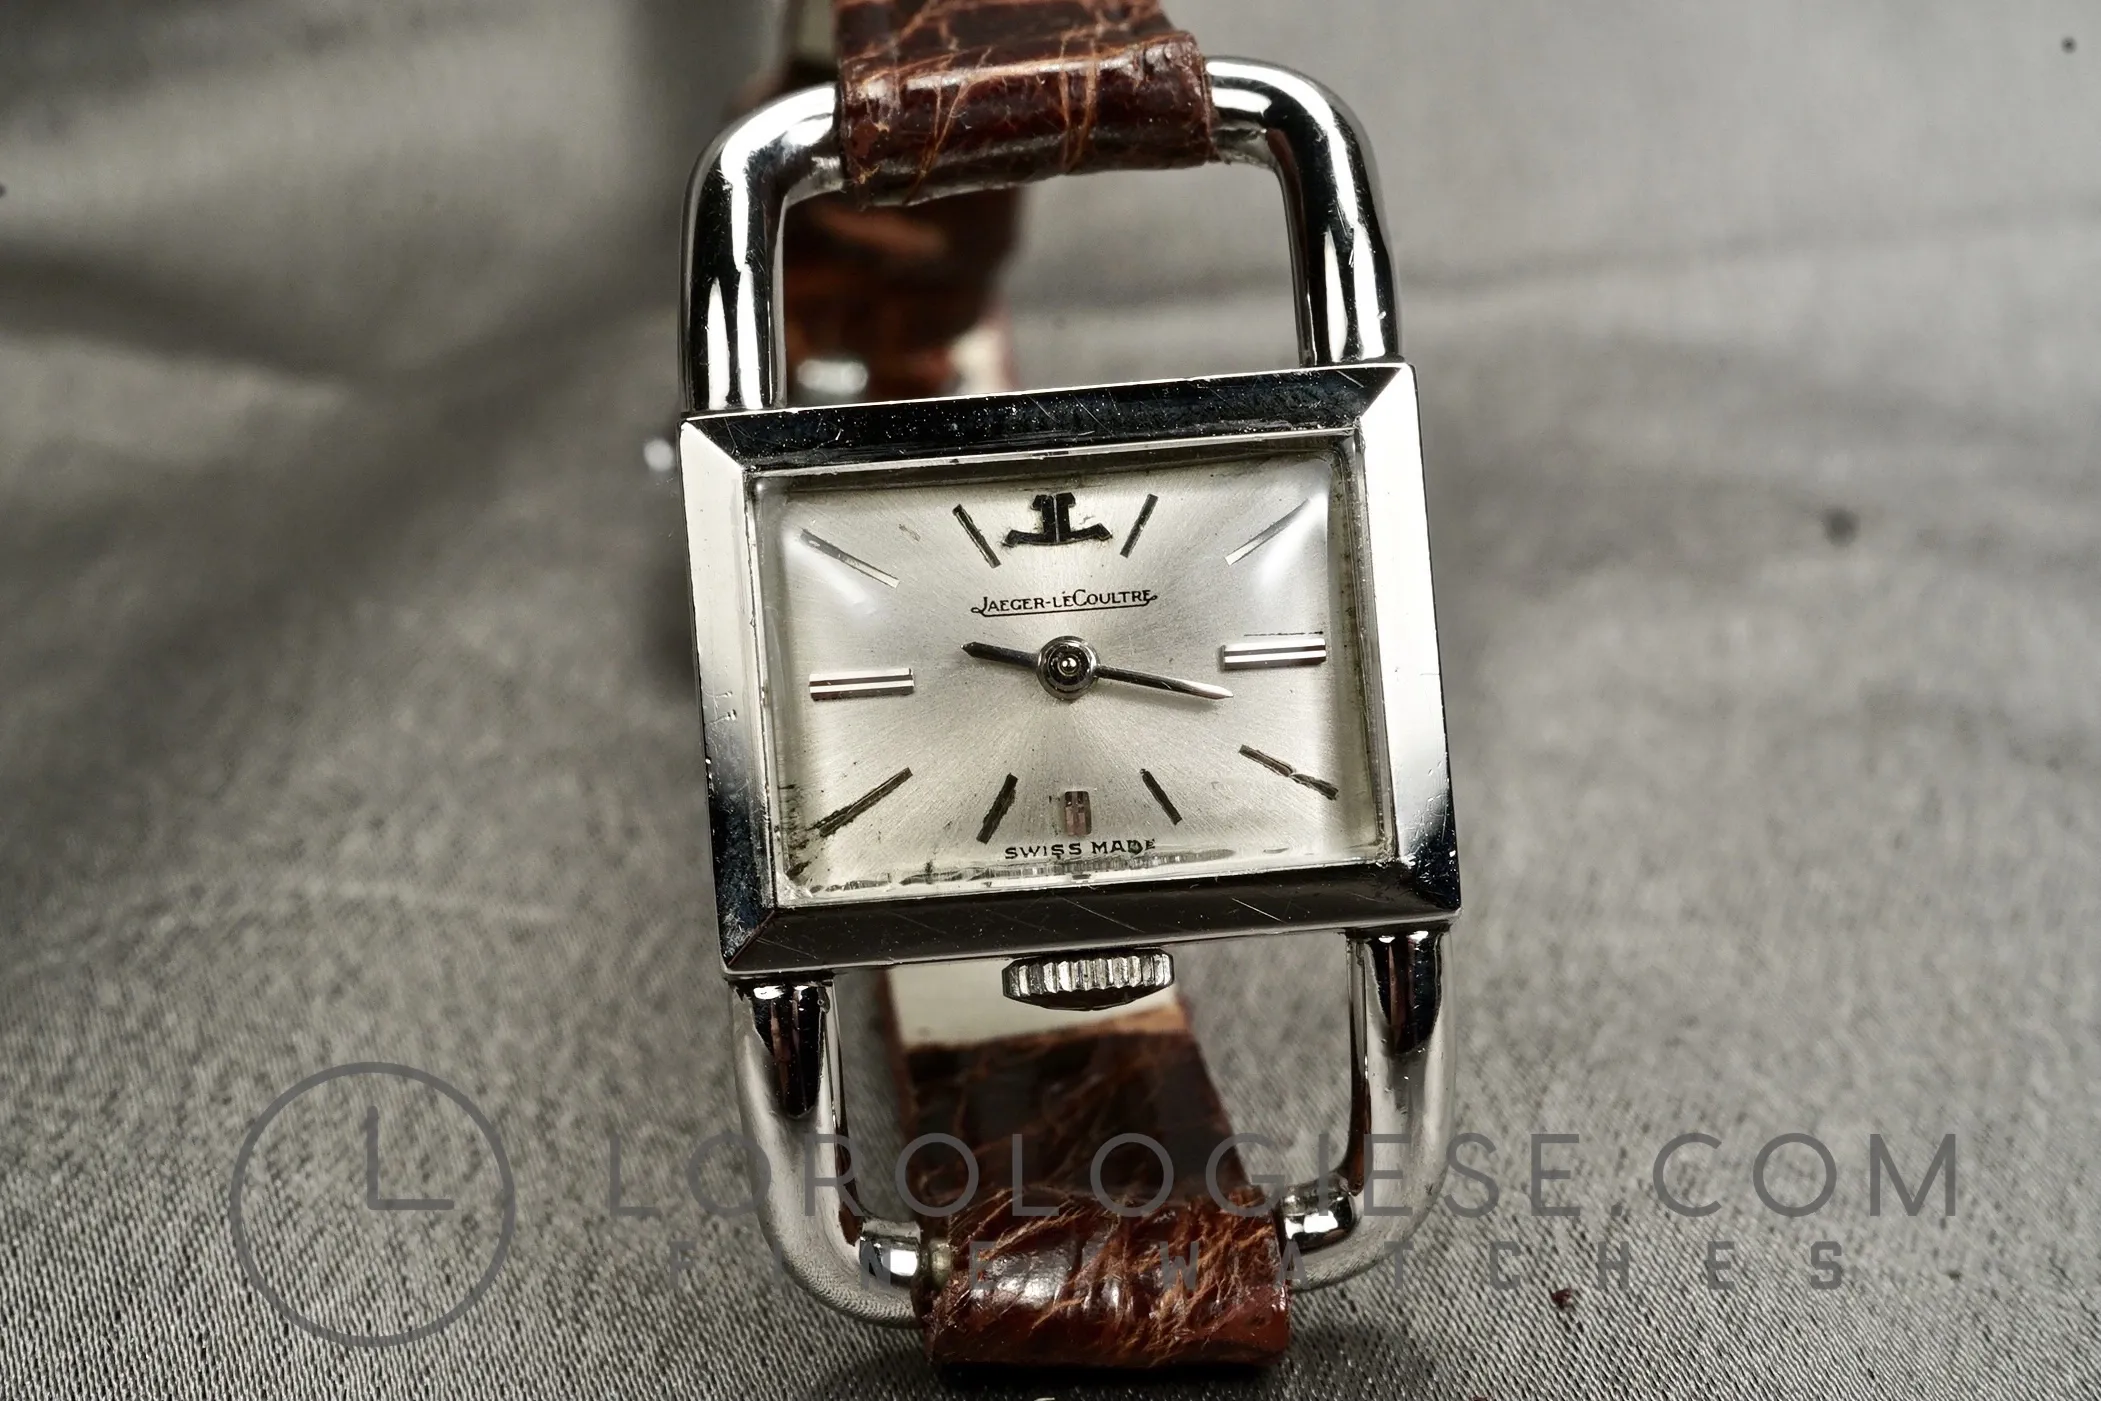 Jaeger-LeCoultre Étrier 1670 20mm Stainless steel Silvered